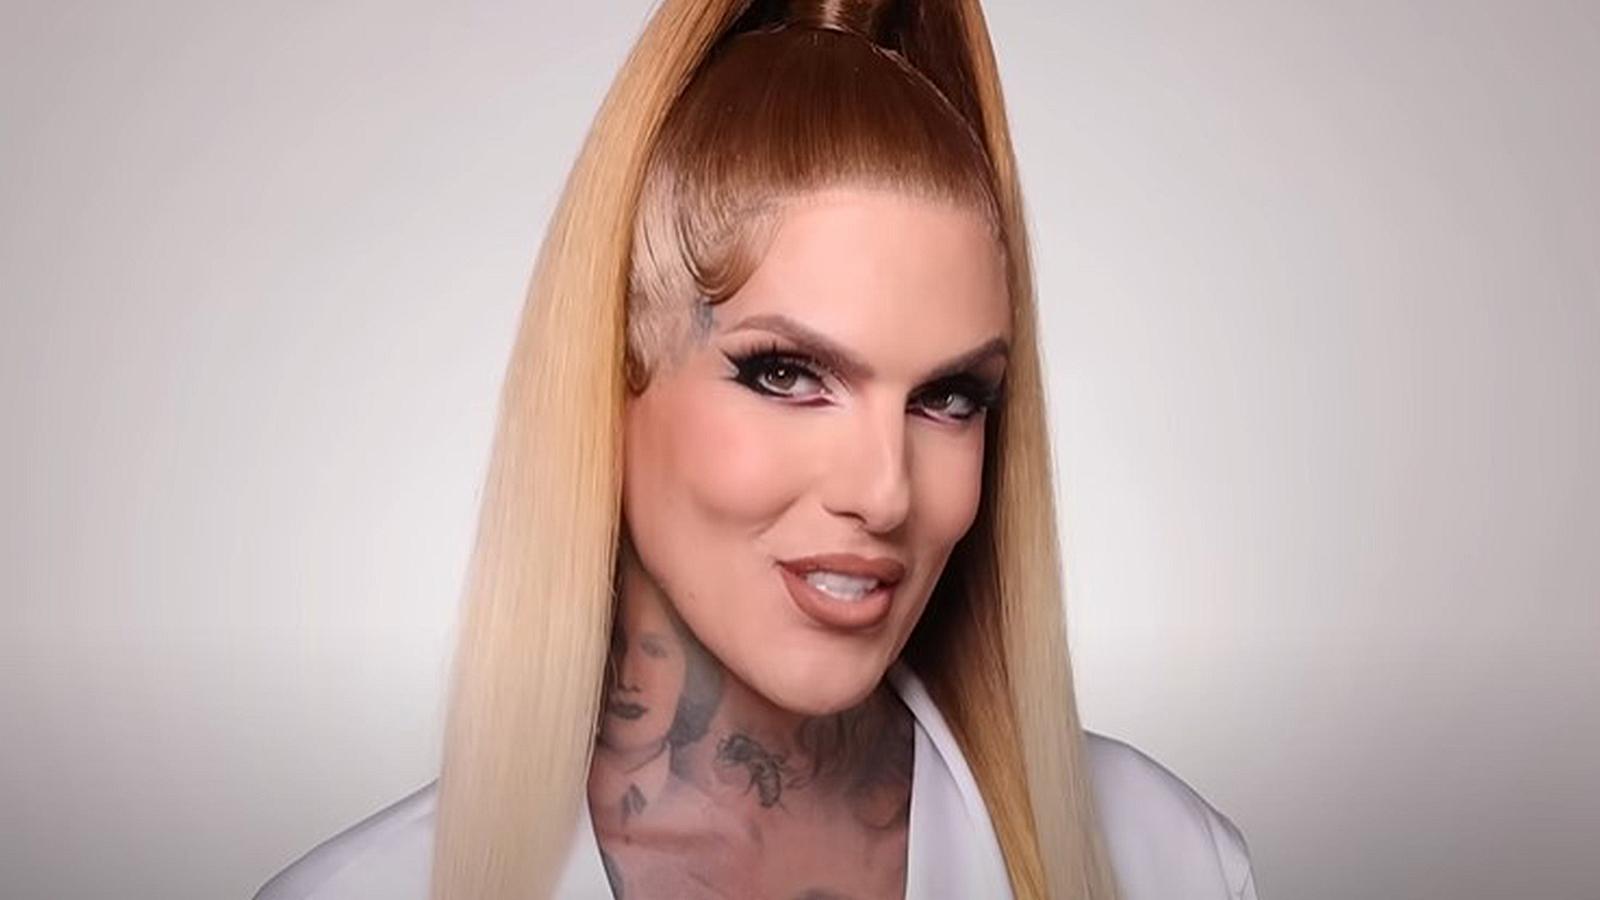 Jeffree Star Calls 15-Year-Old Beauty Vlogger 'Disgusting